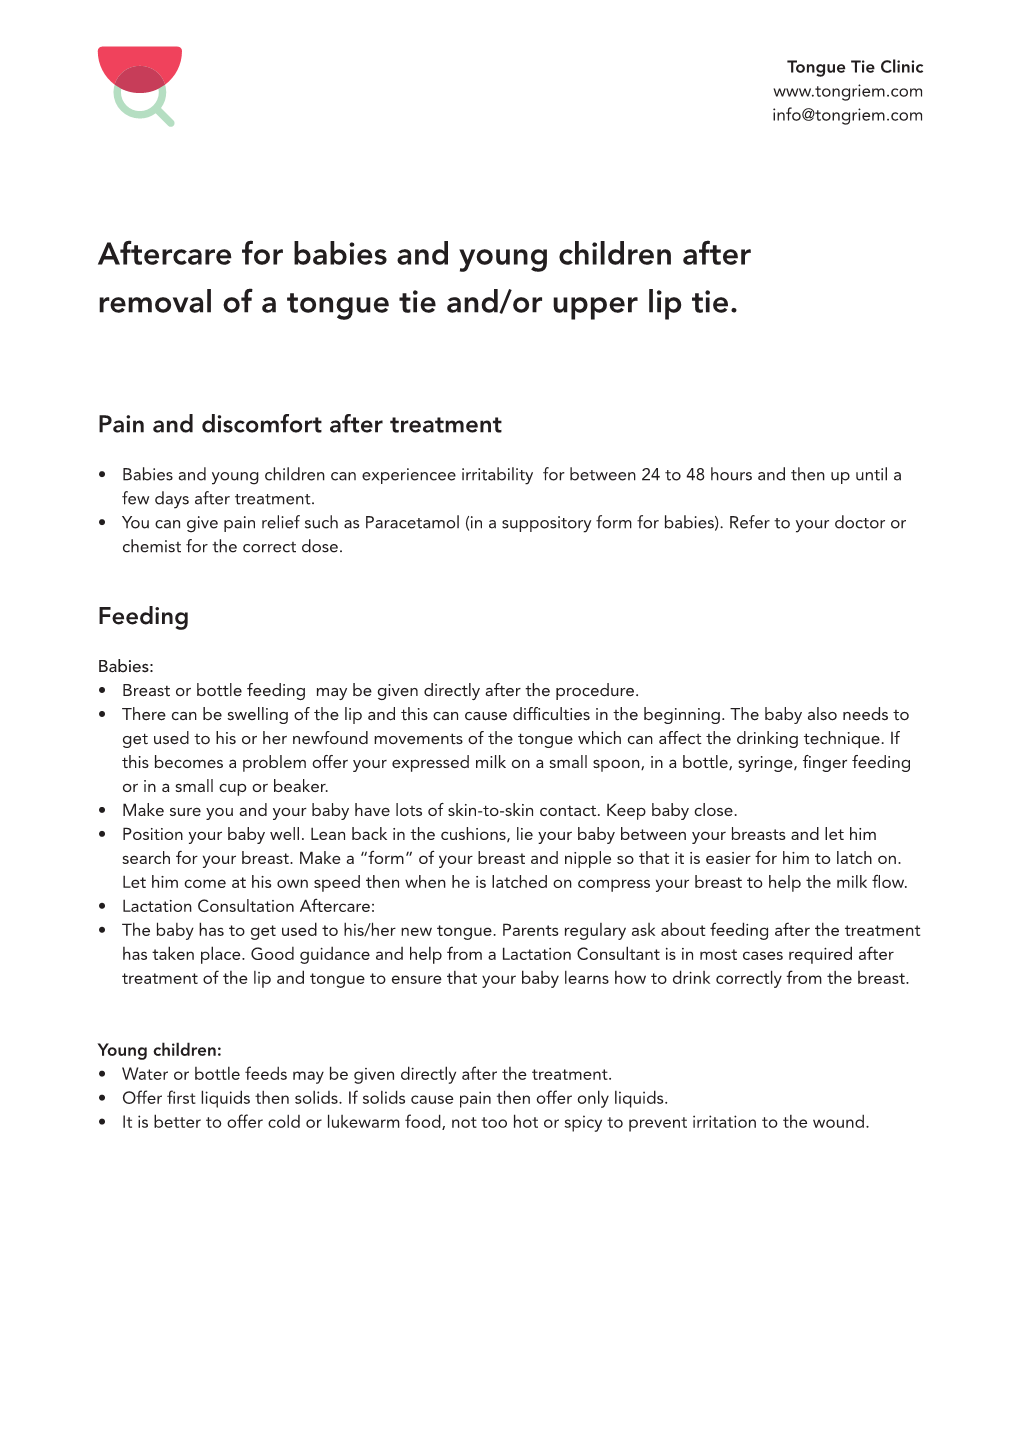 Aftercare for Babies and Young Children After Removal of a Tongue Tie And/Or Upper Lip Tie